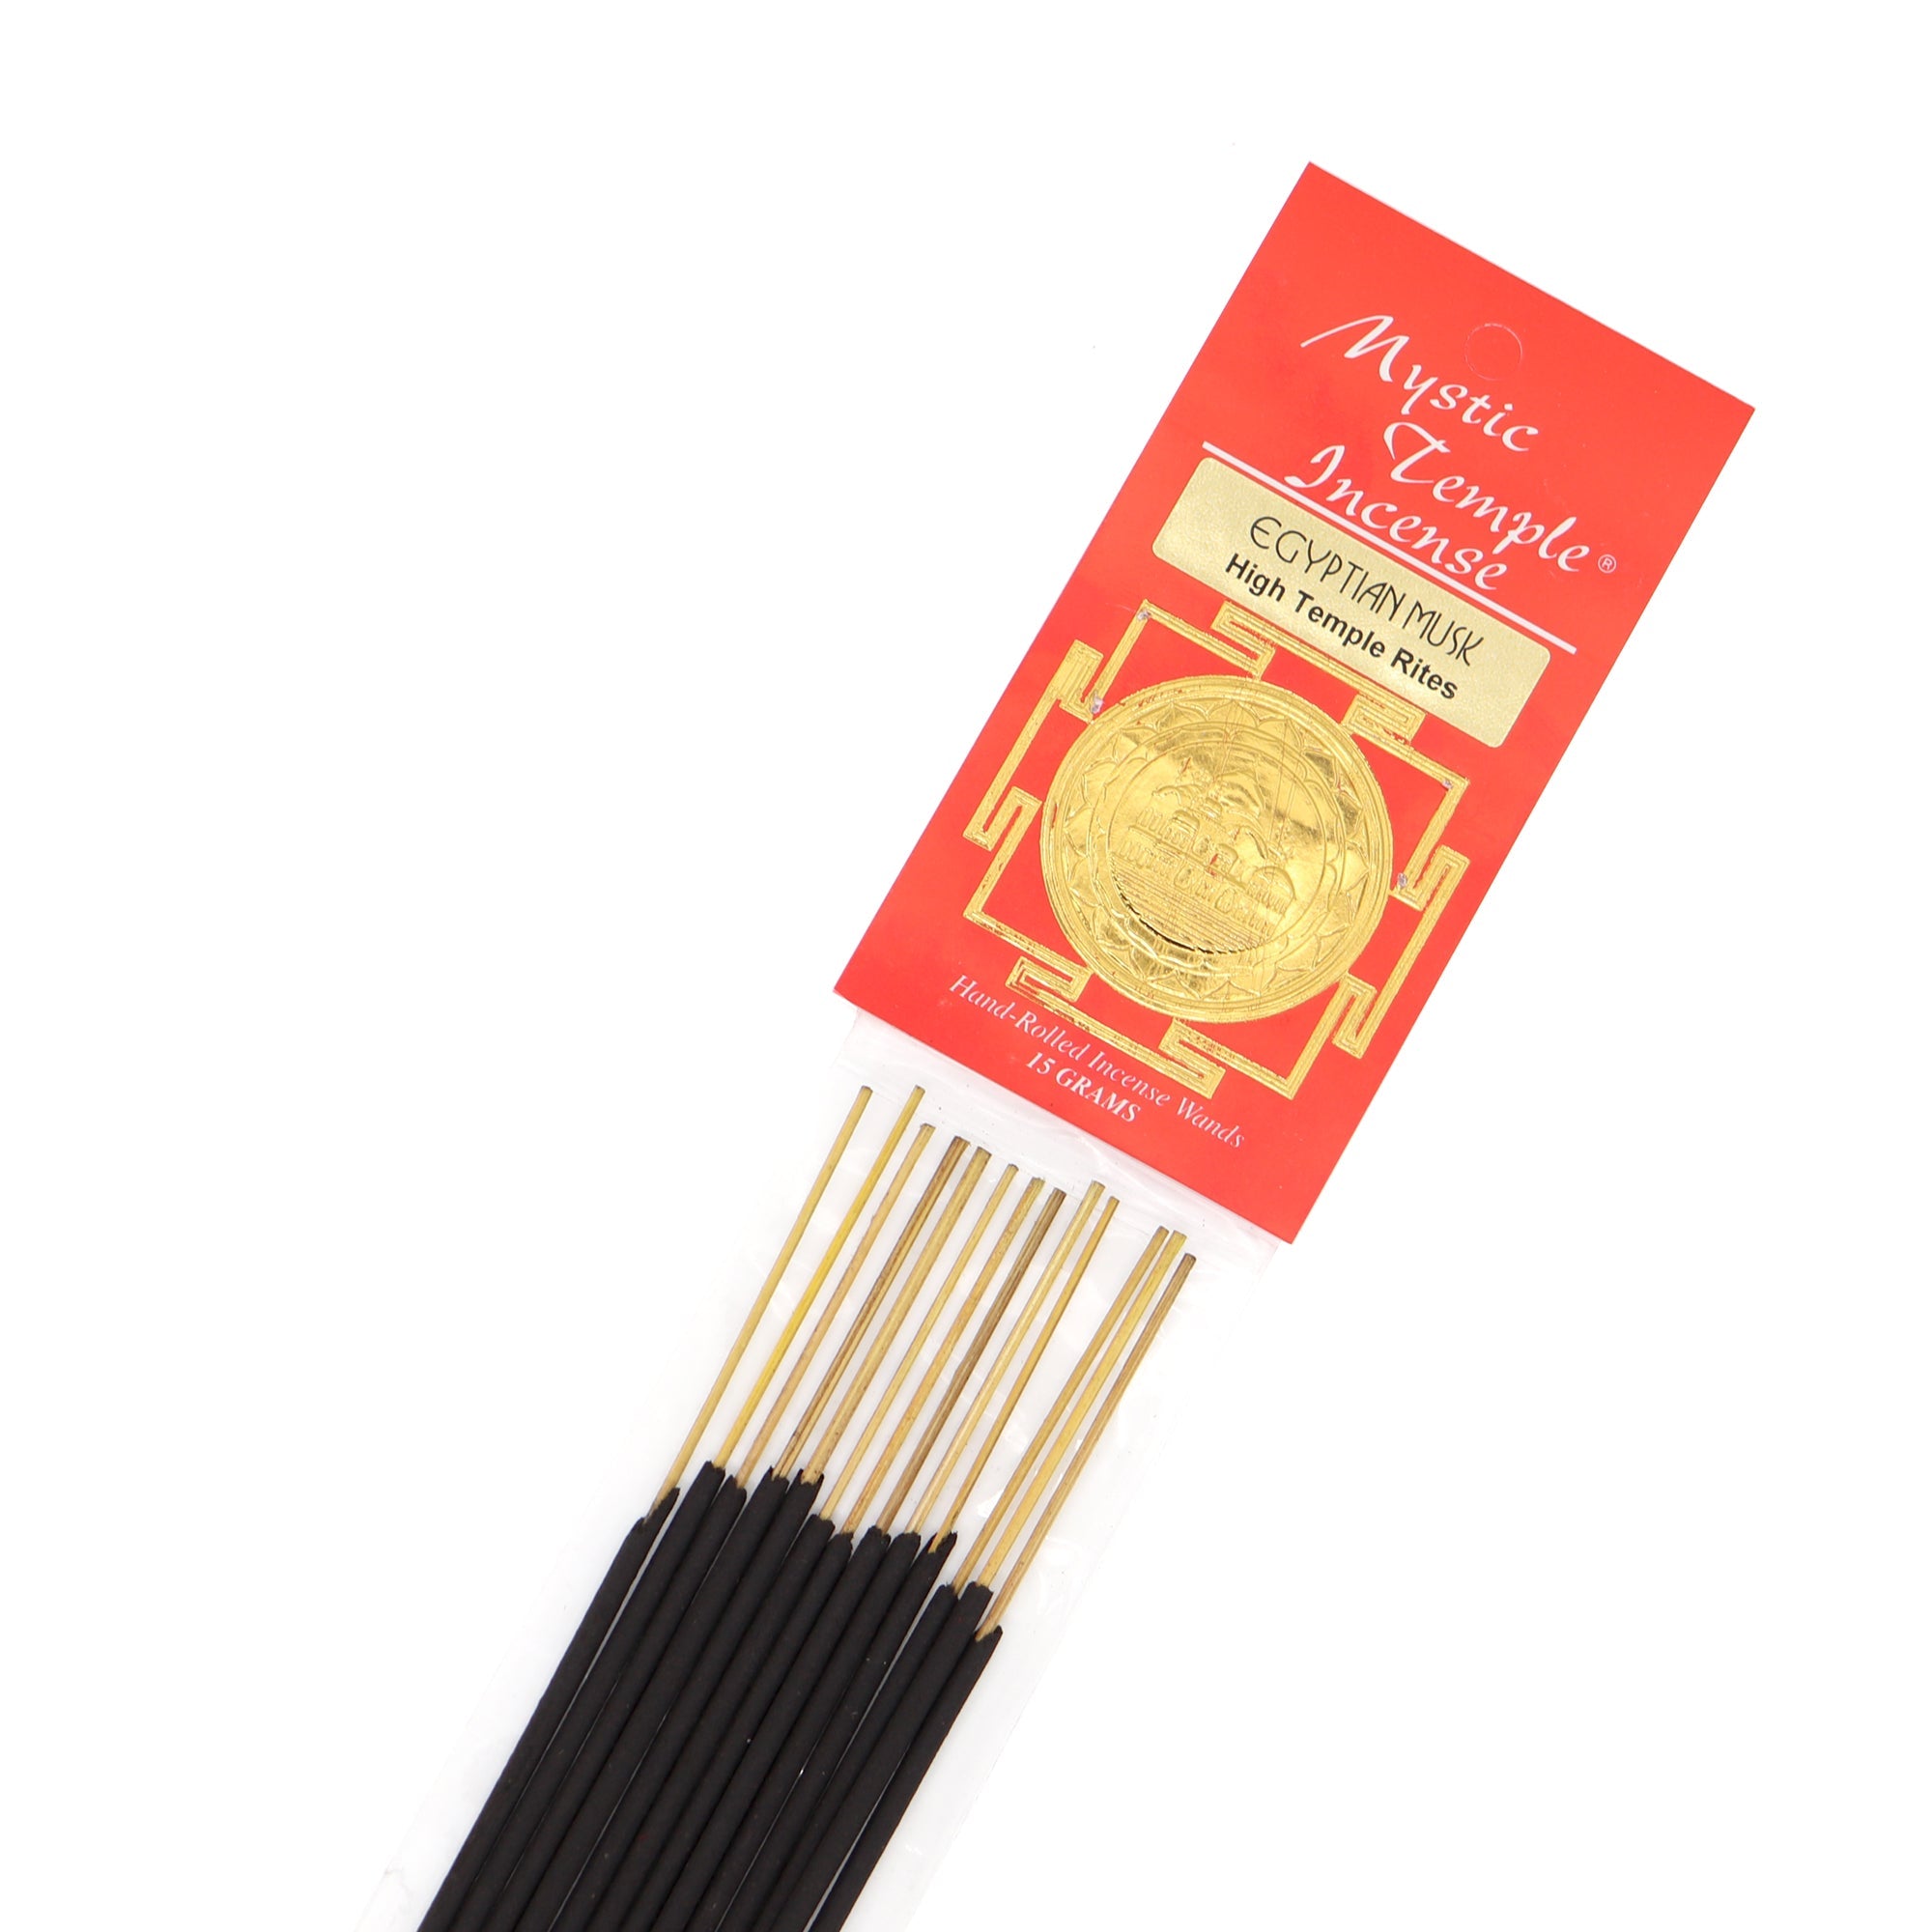 Egyptian Musk Incense - 13 Moons